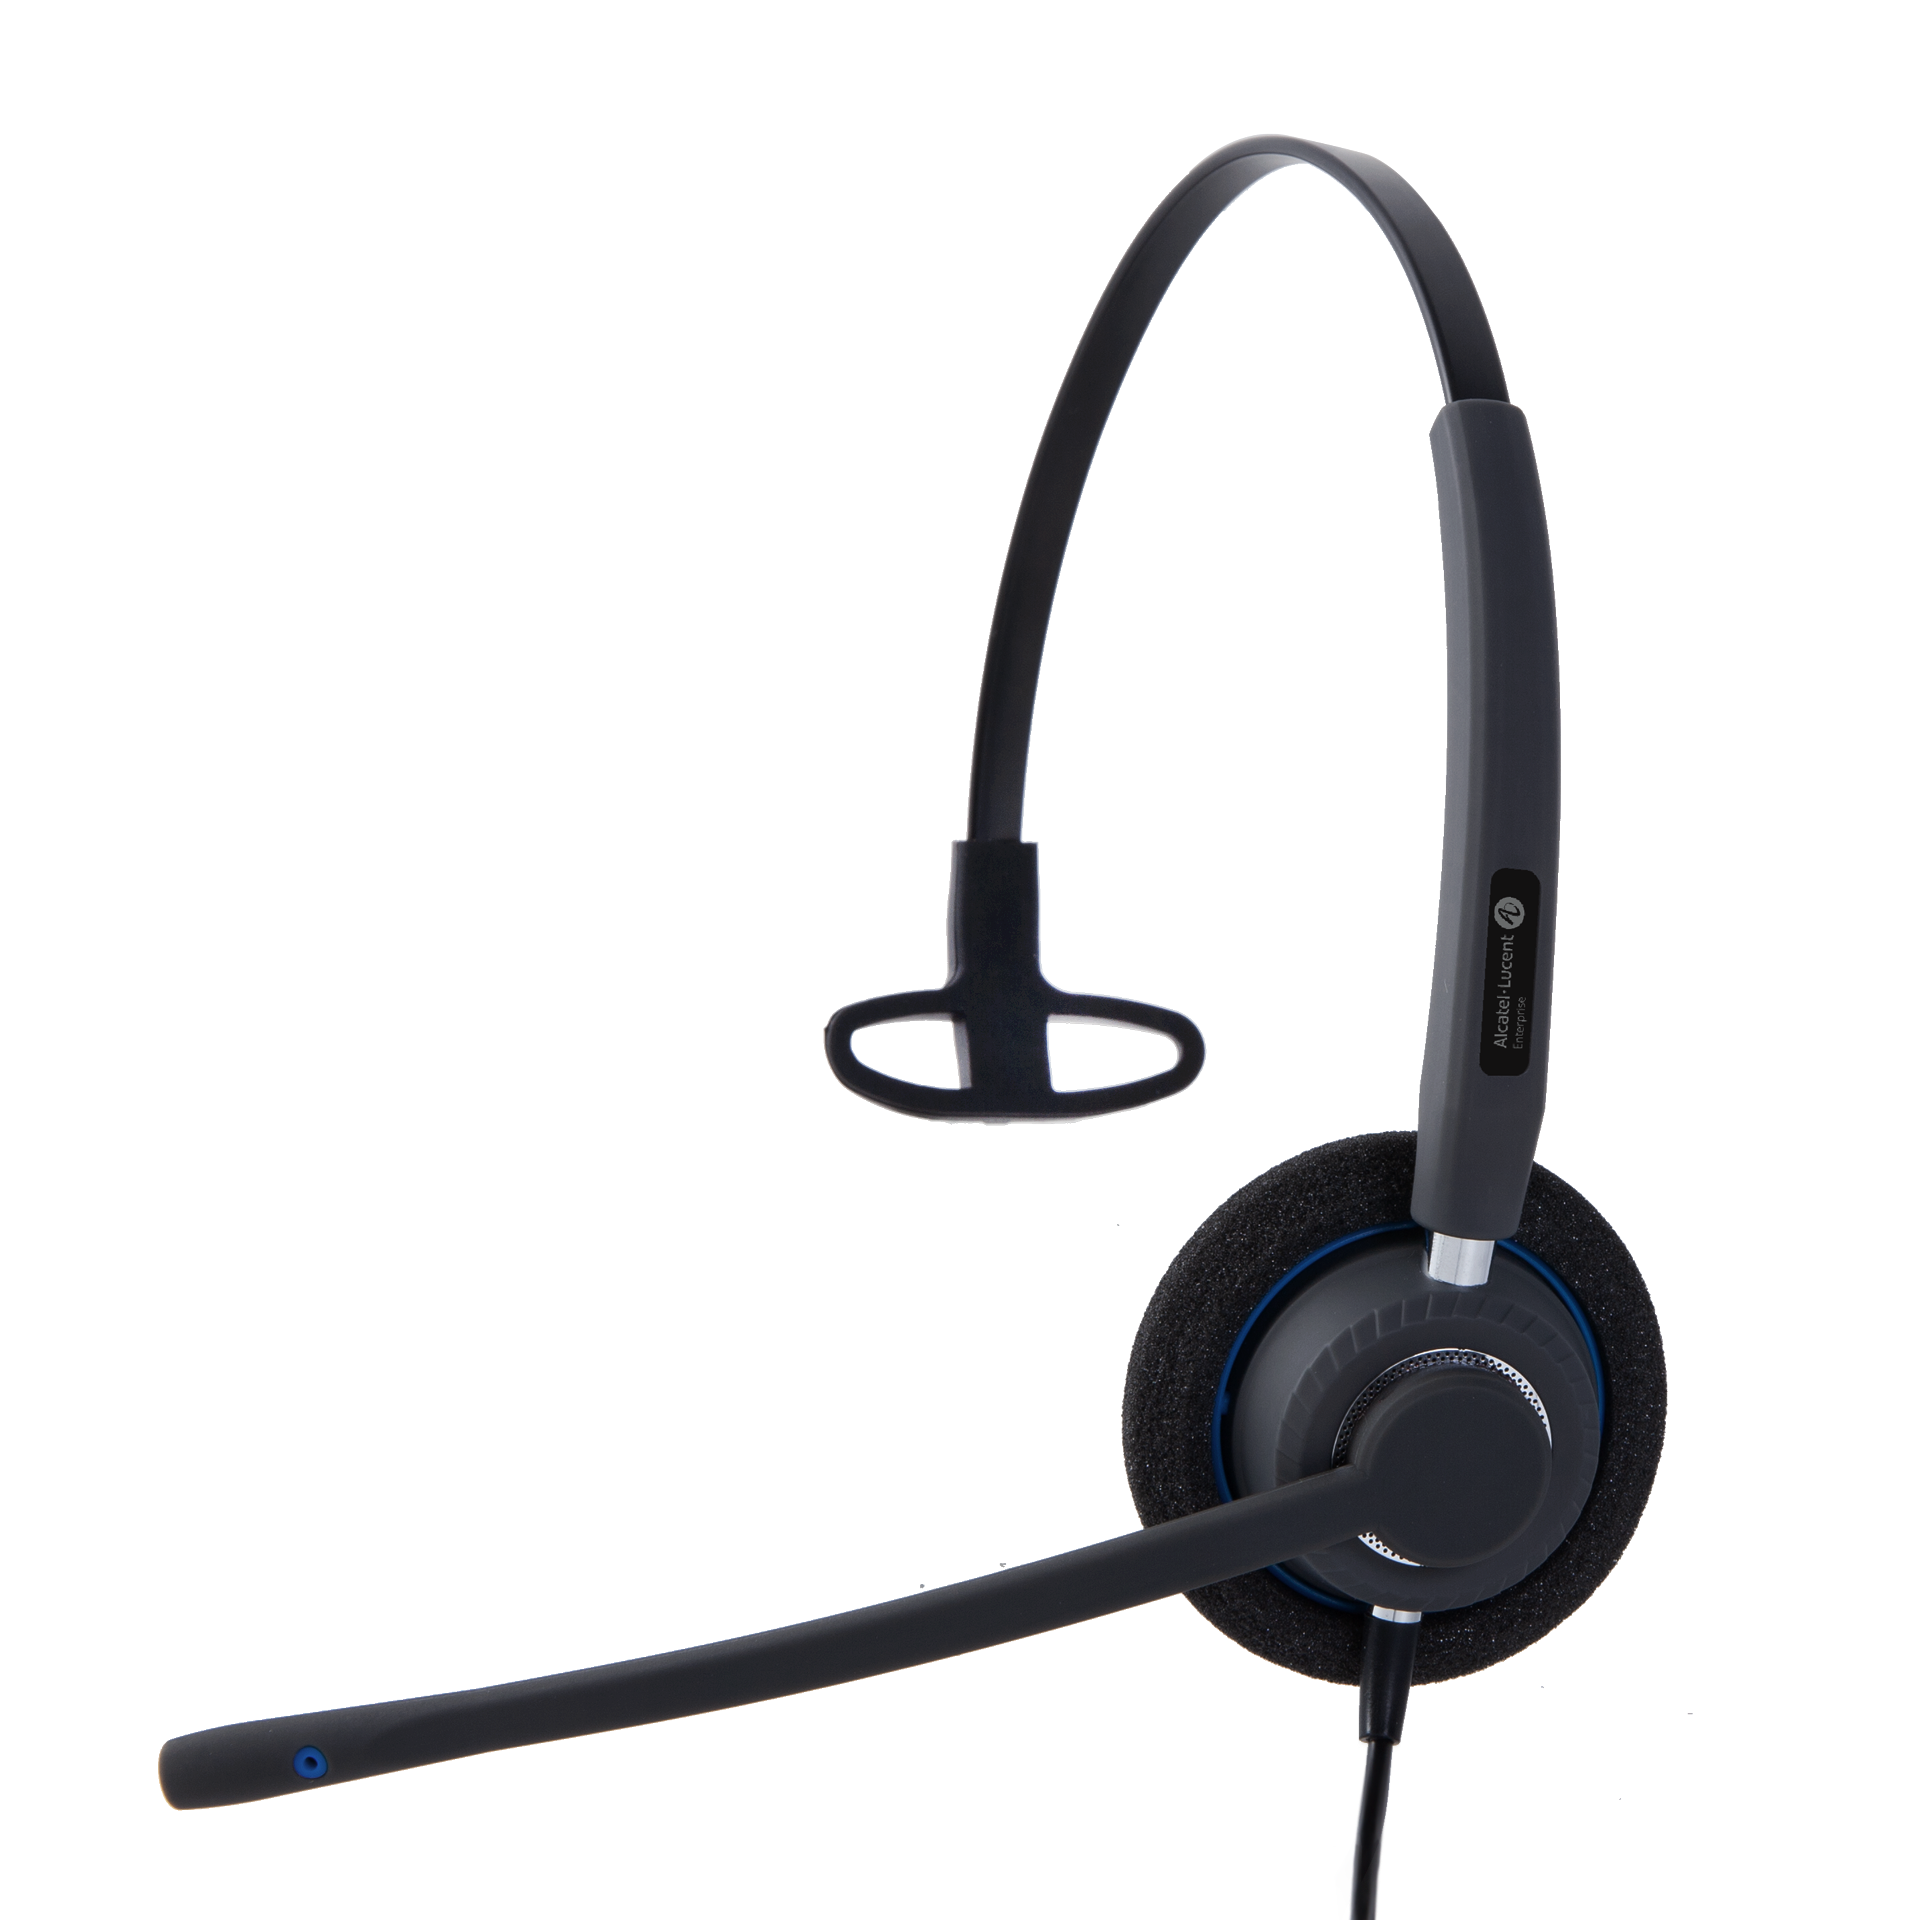 Suitable For Long-term Wearing Large Earpiece Noise-cancelling Microphone Corded Binaural AH 22 U Premium USB Headset